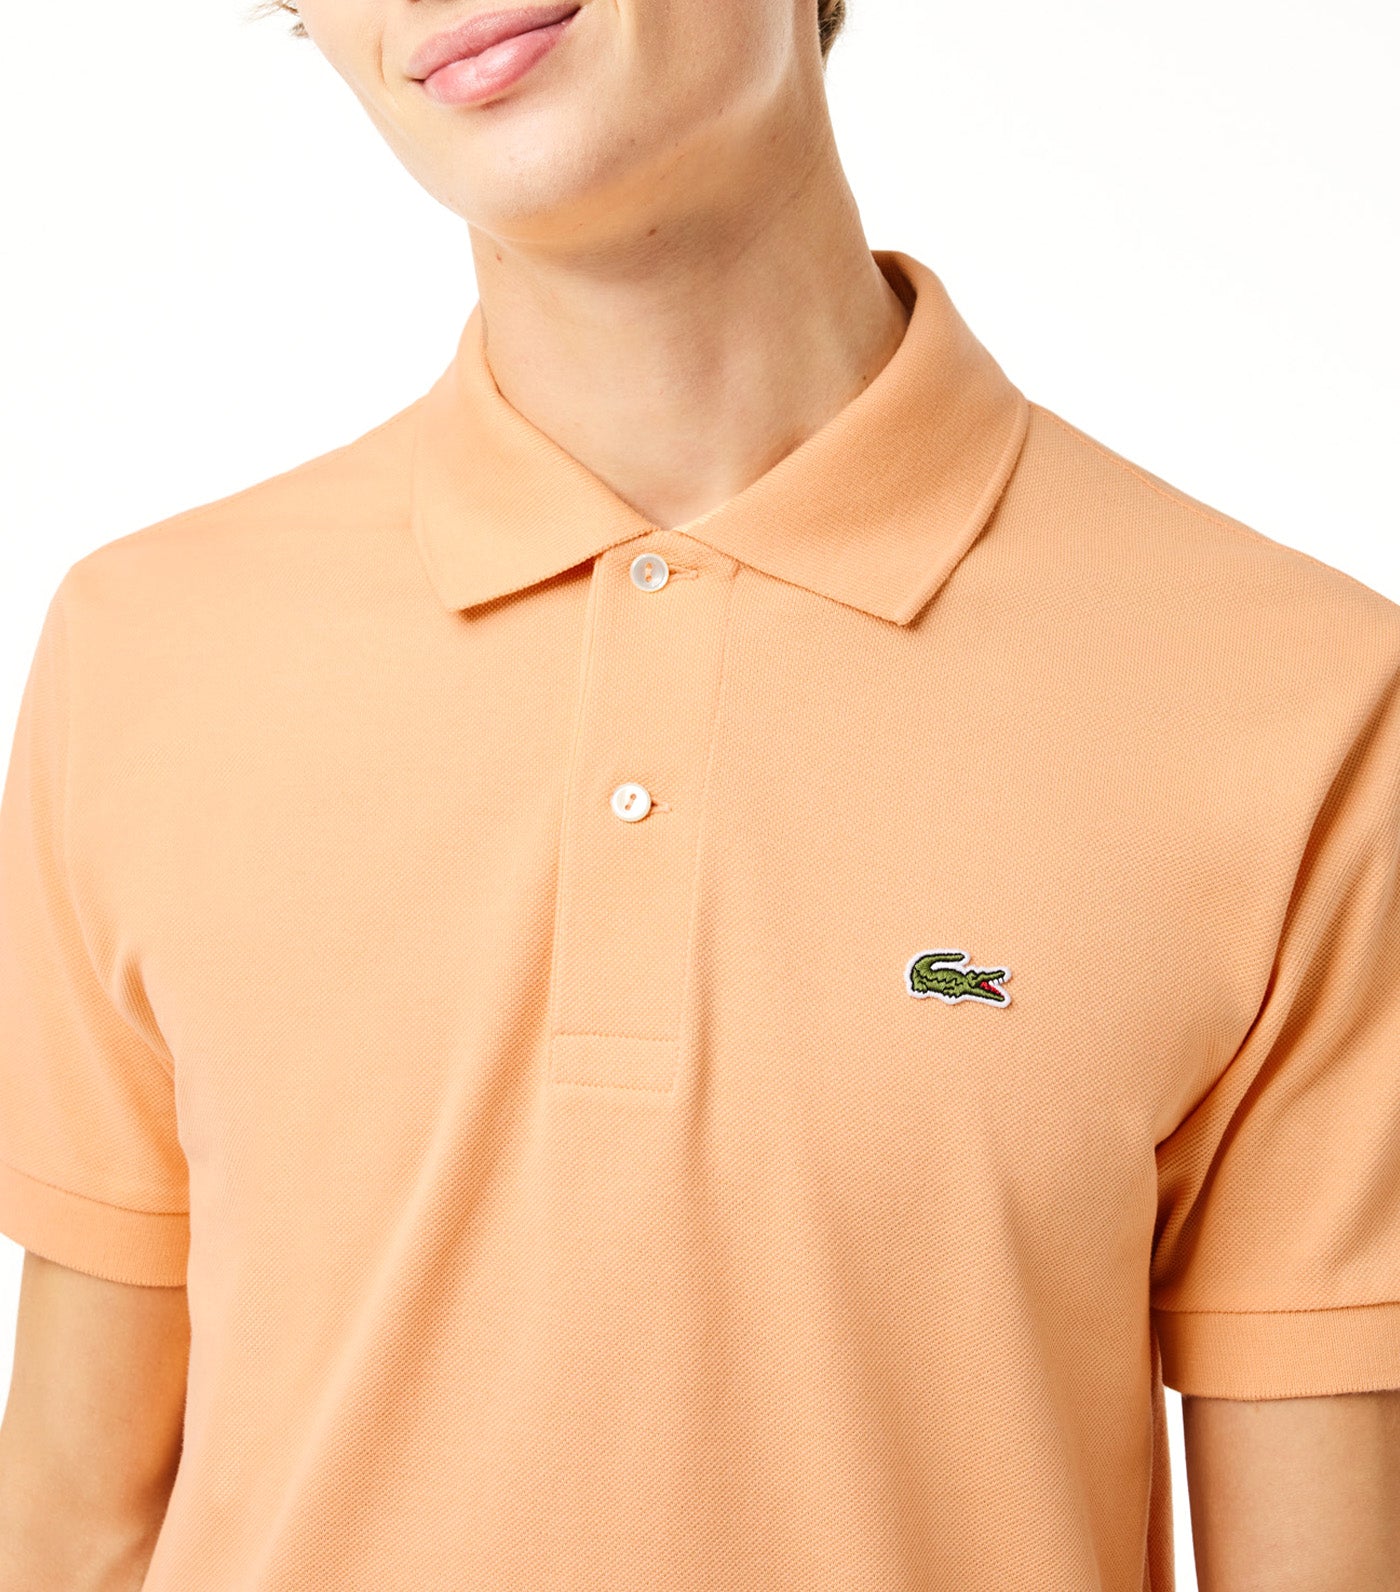 Lacoste Classic Fit L.12.12 Polo Shirt Cina